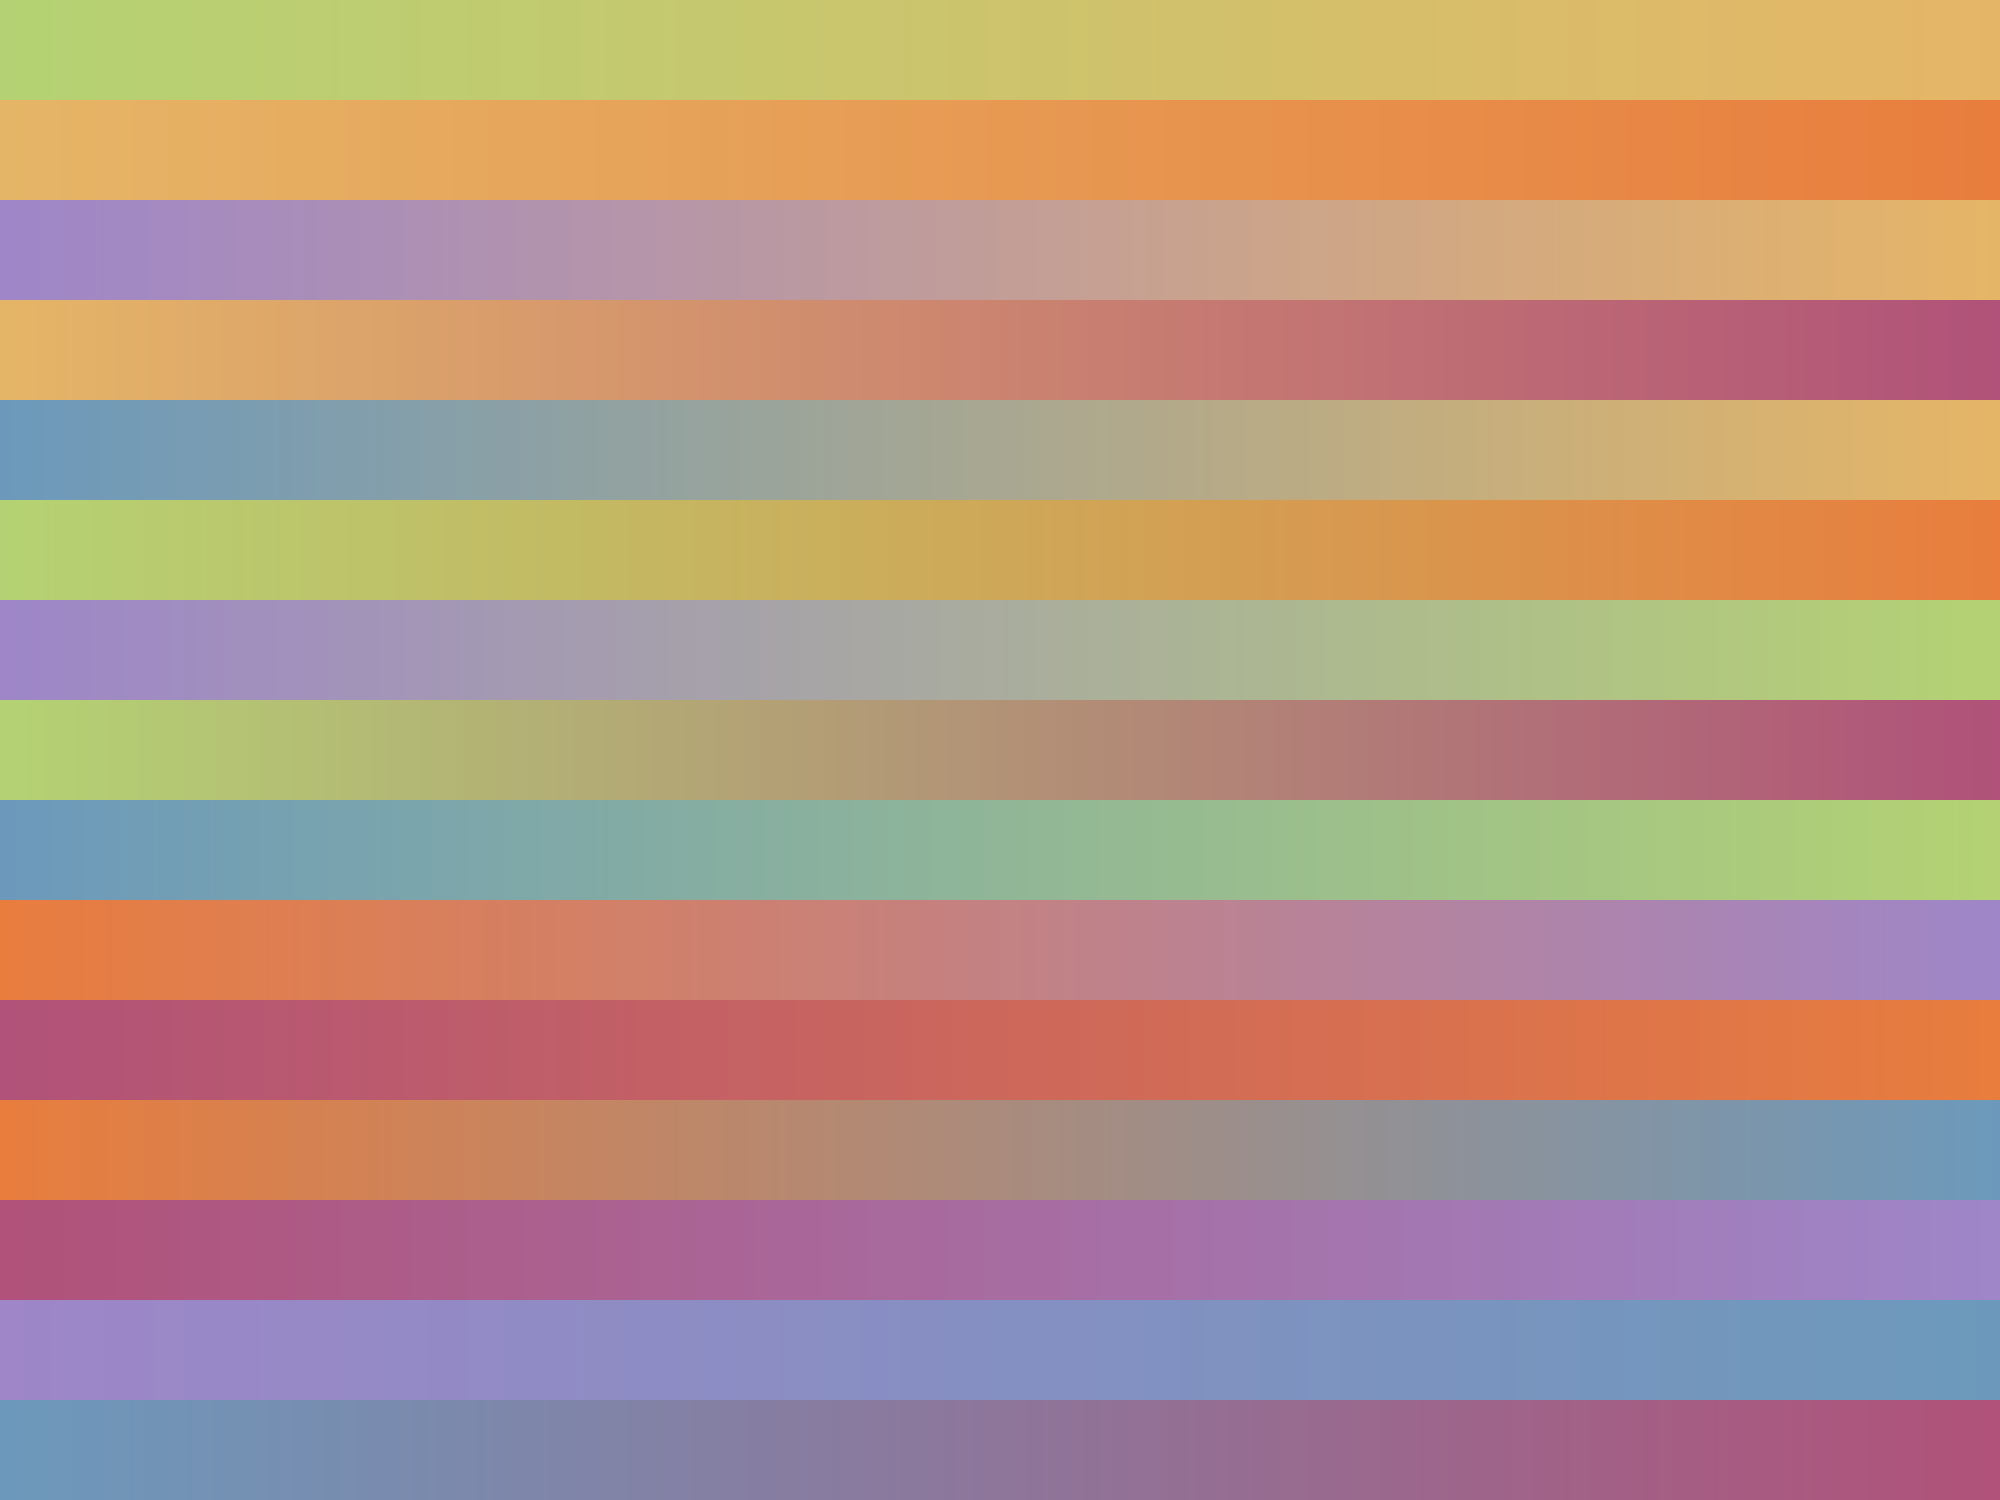 All the possible gradients, ignoring direction